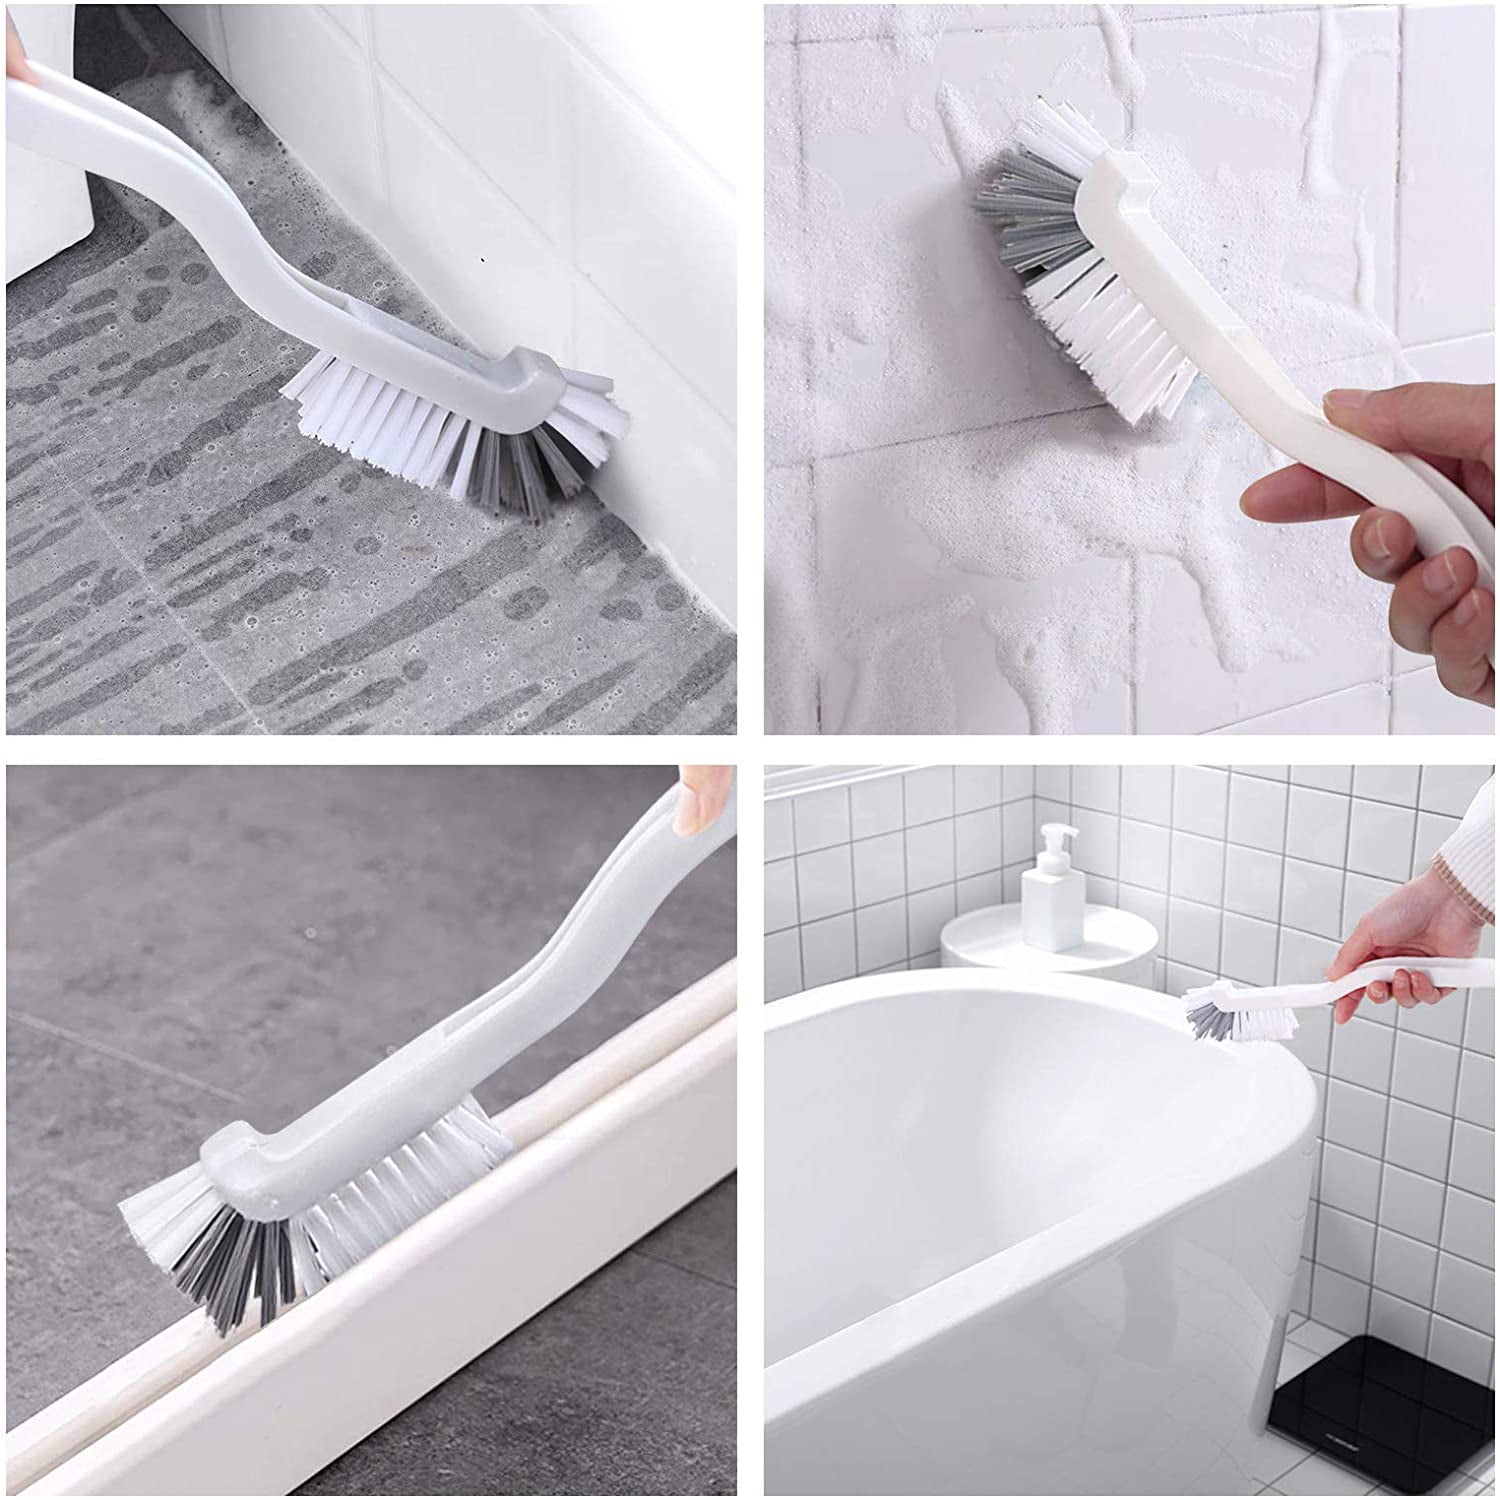 Mouliraty Cleaning Brushes with Handles 2 Pcs Cleaning Brush Small Stiff Scrub Brush for Cleaning Sink Scrub Brush Bathroom Kitchen Edge Corner Grout